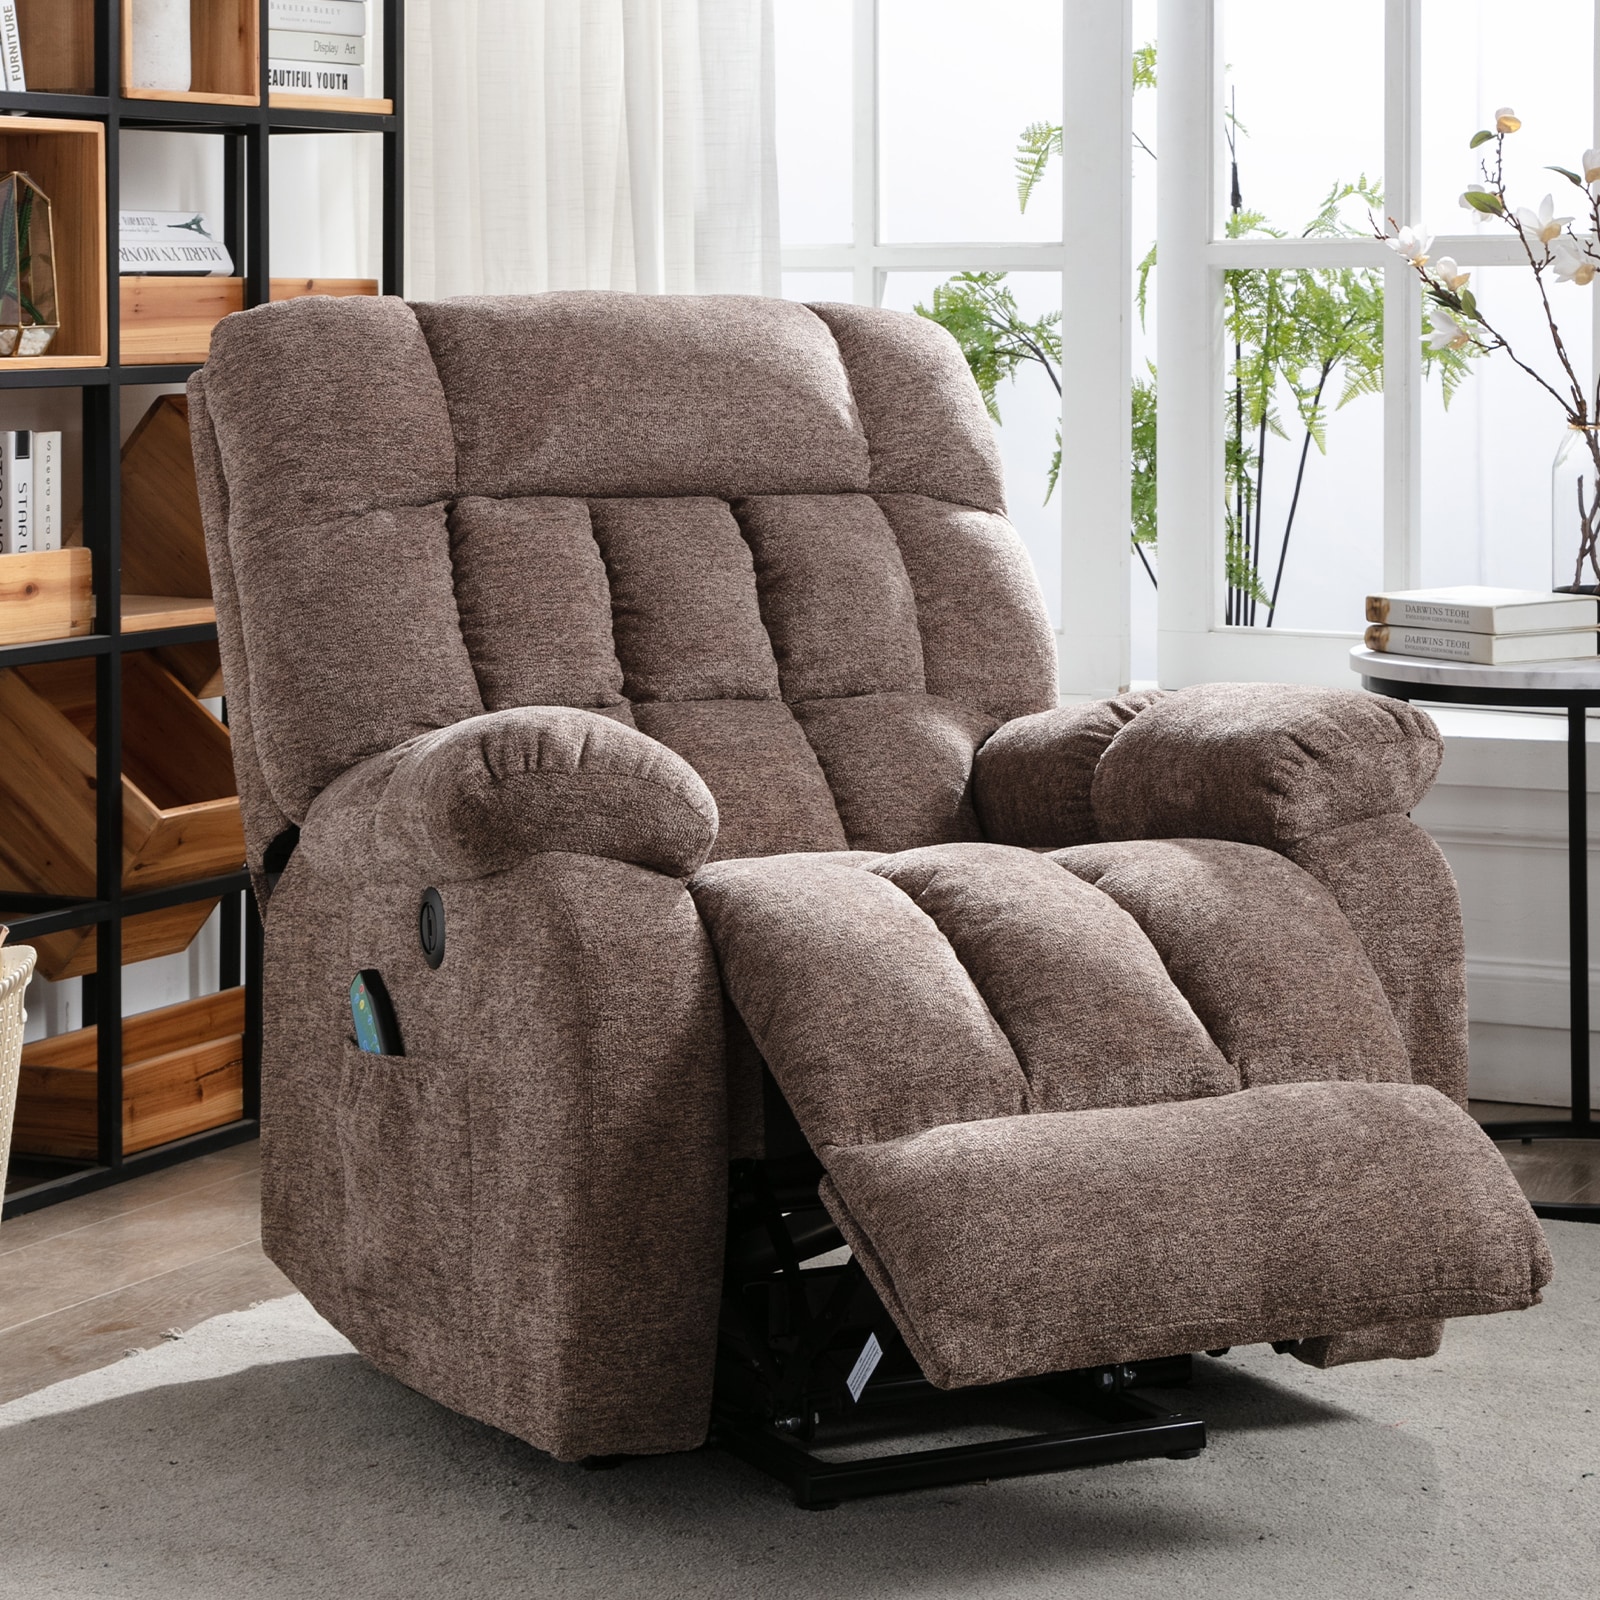 41” Oversized Power Lift Chair - Heated Massage Electric Recliner